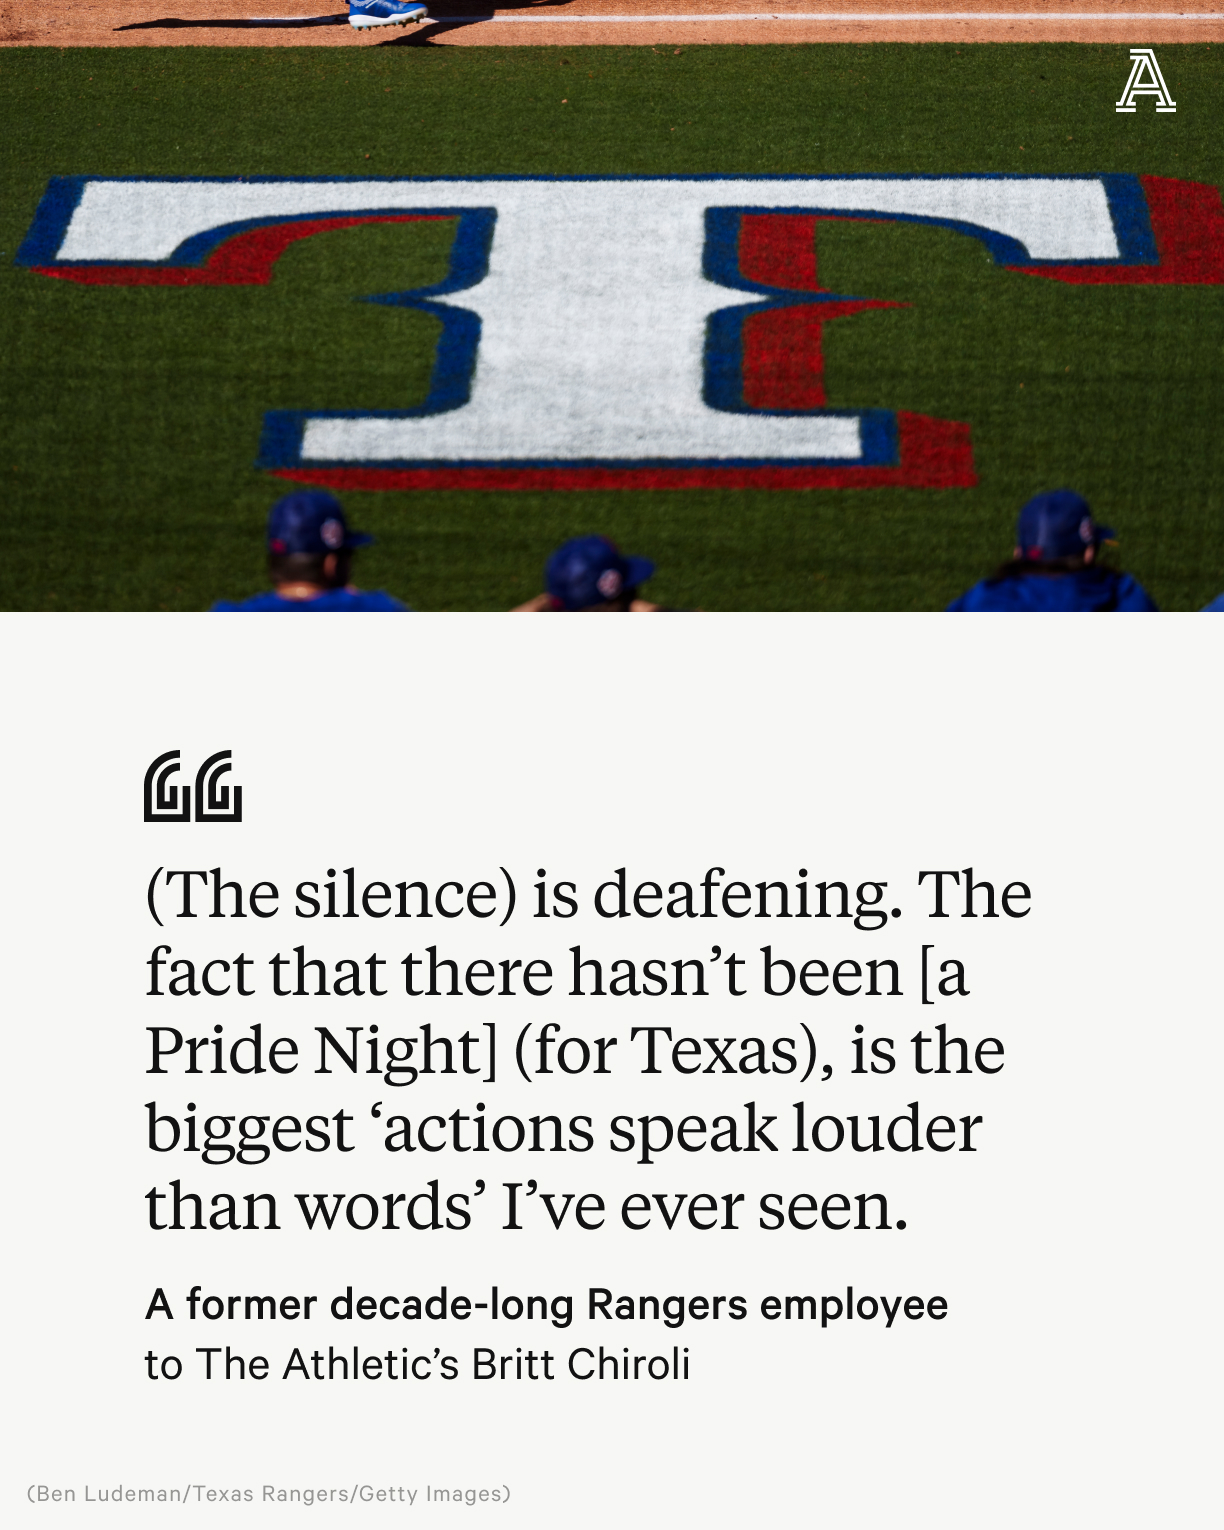 Chris Carlin on X: The @Rangers are the ONLY team in @MLB that doesn't  host a Pride Night. As a Rangers fan of 30+yrs, it's appalling. The state  of Texas has 2nd